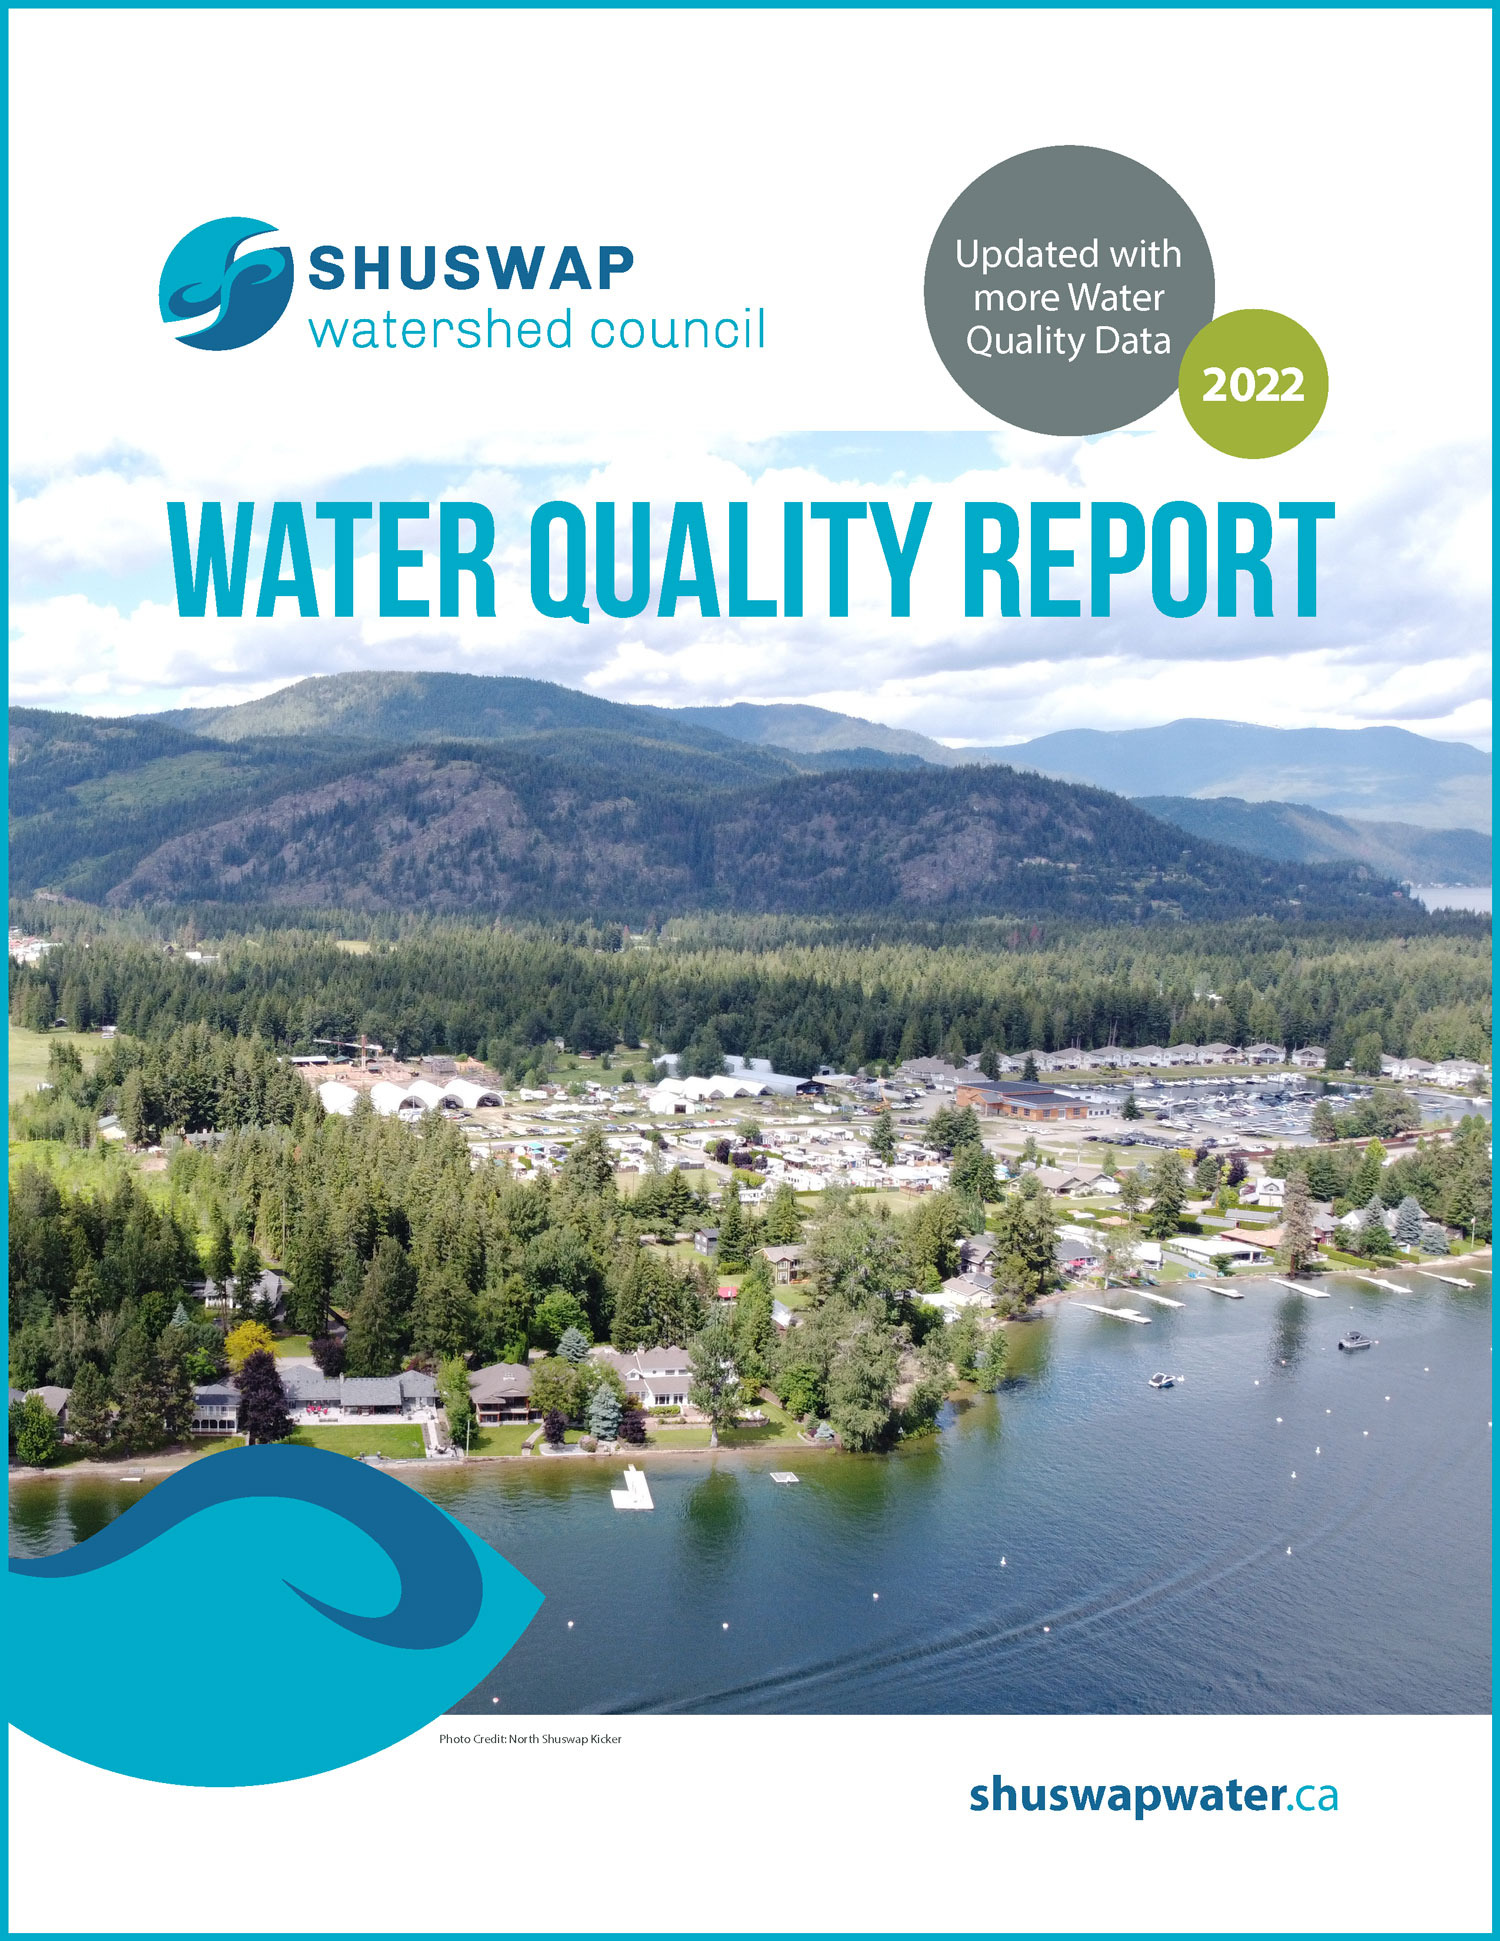 Water Quality Report 2022